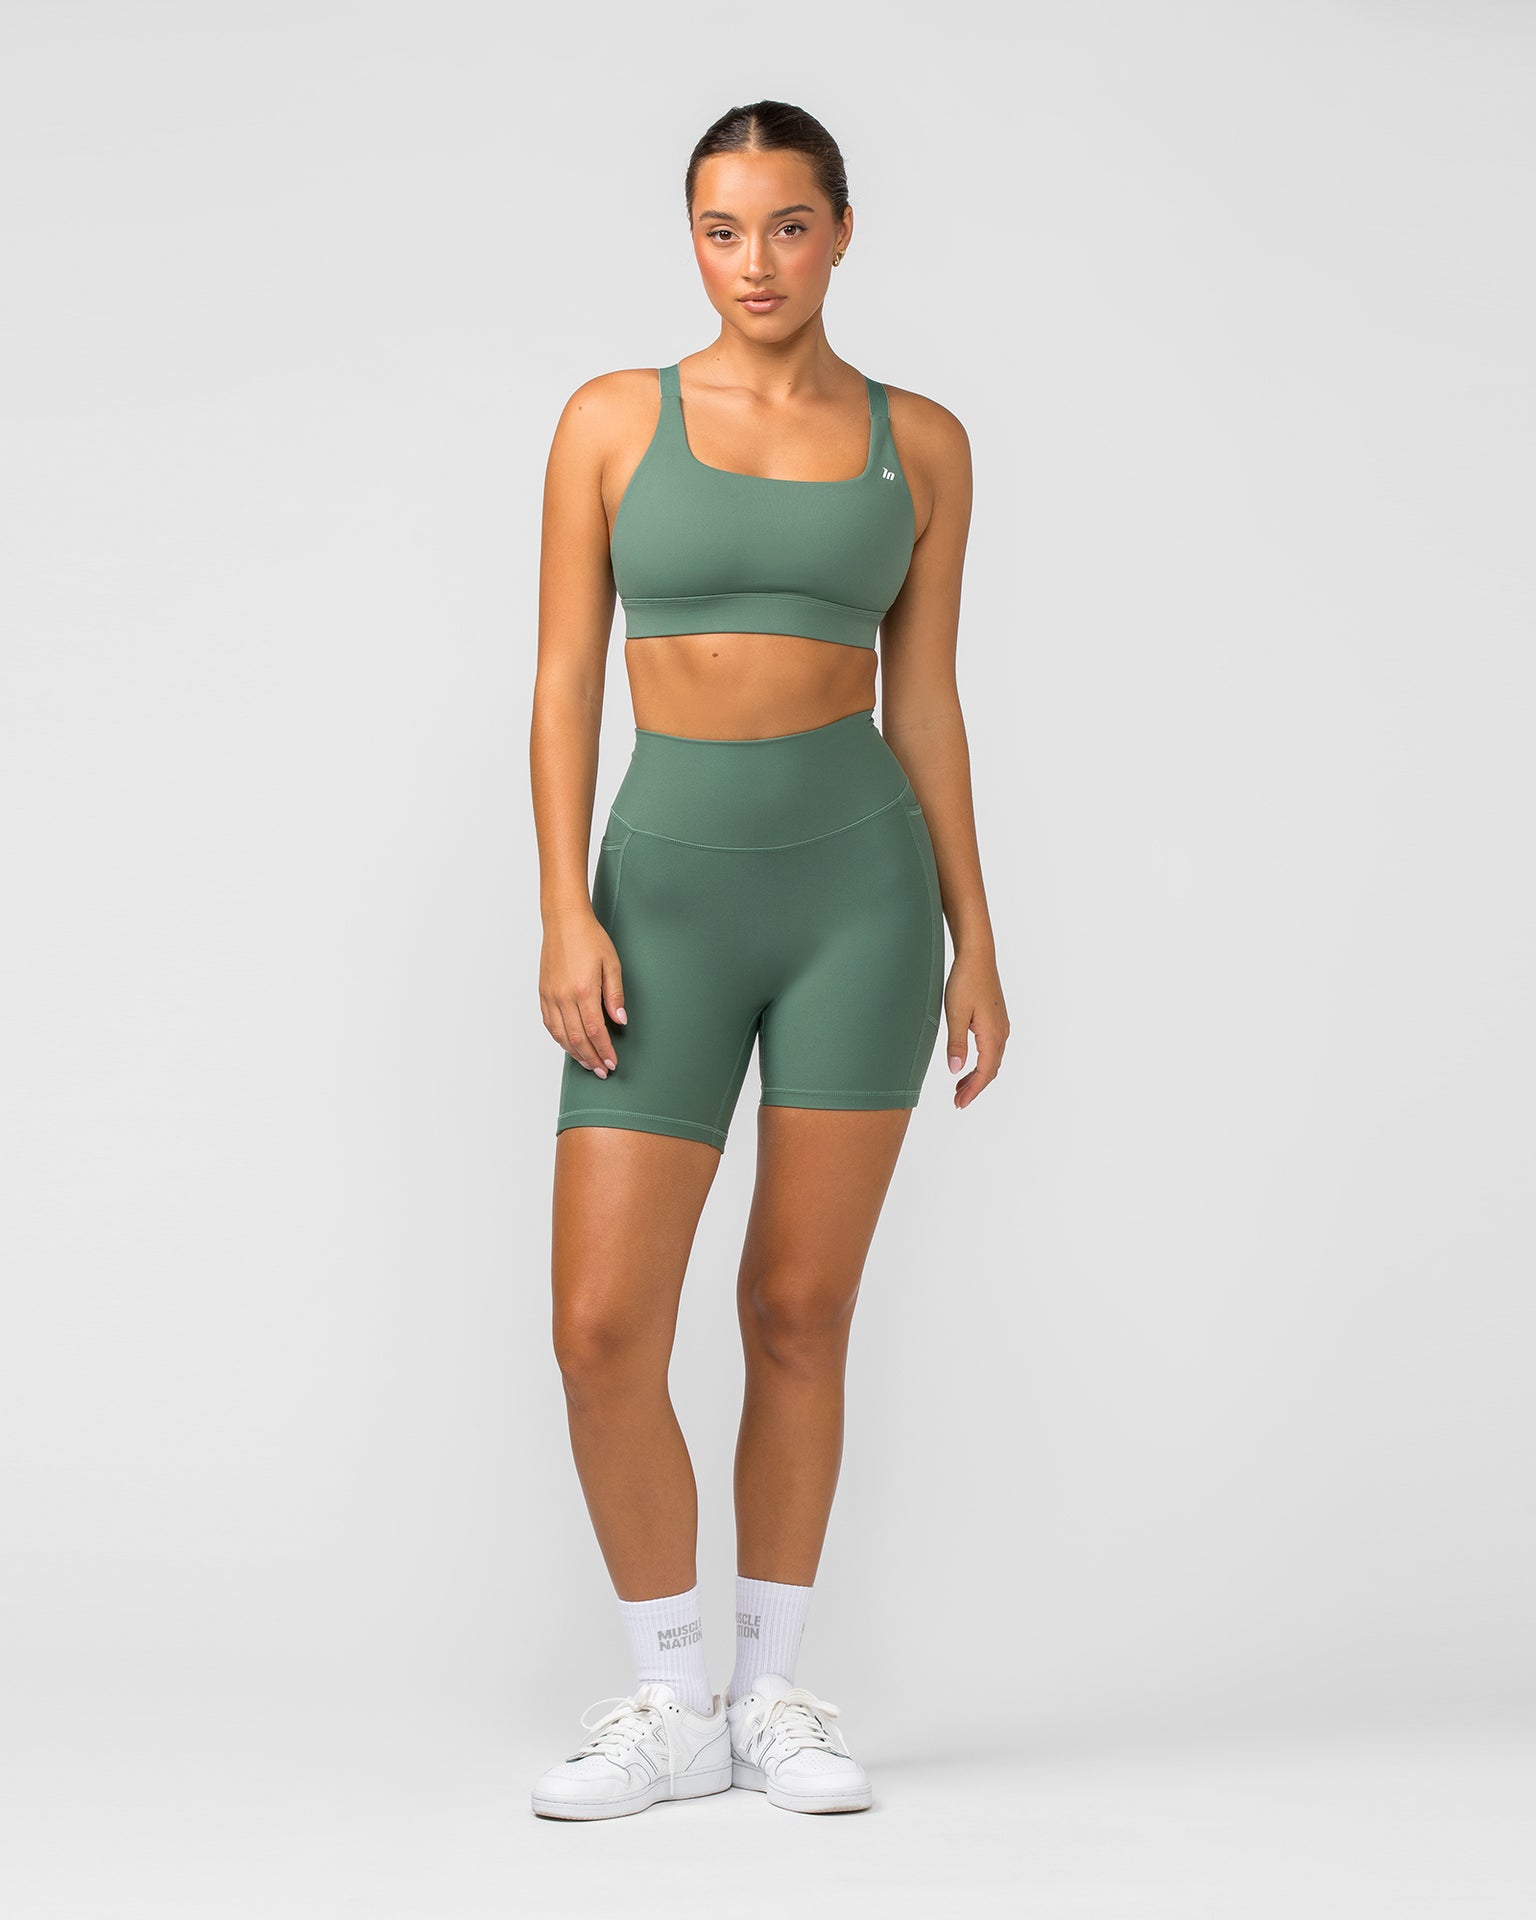 Muscle Nation Sports Bras Base Bra - Mineral Green